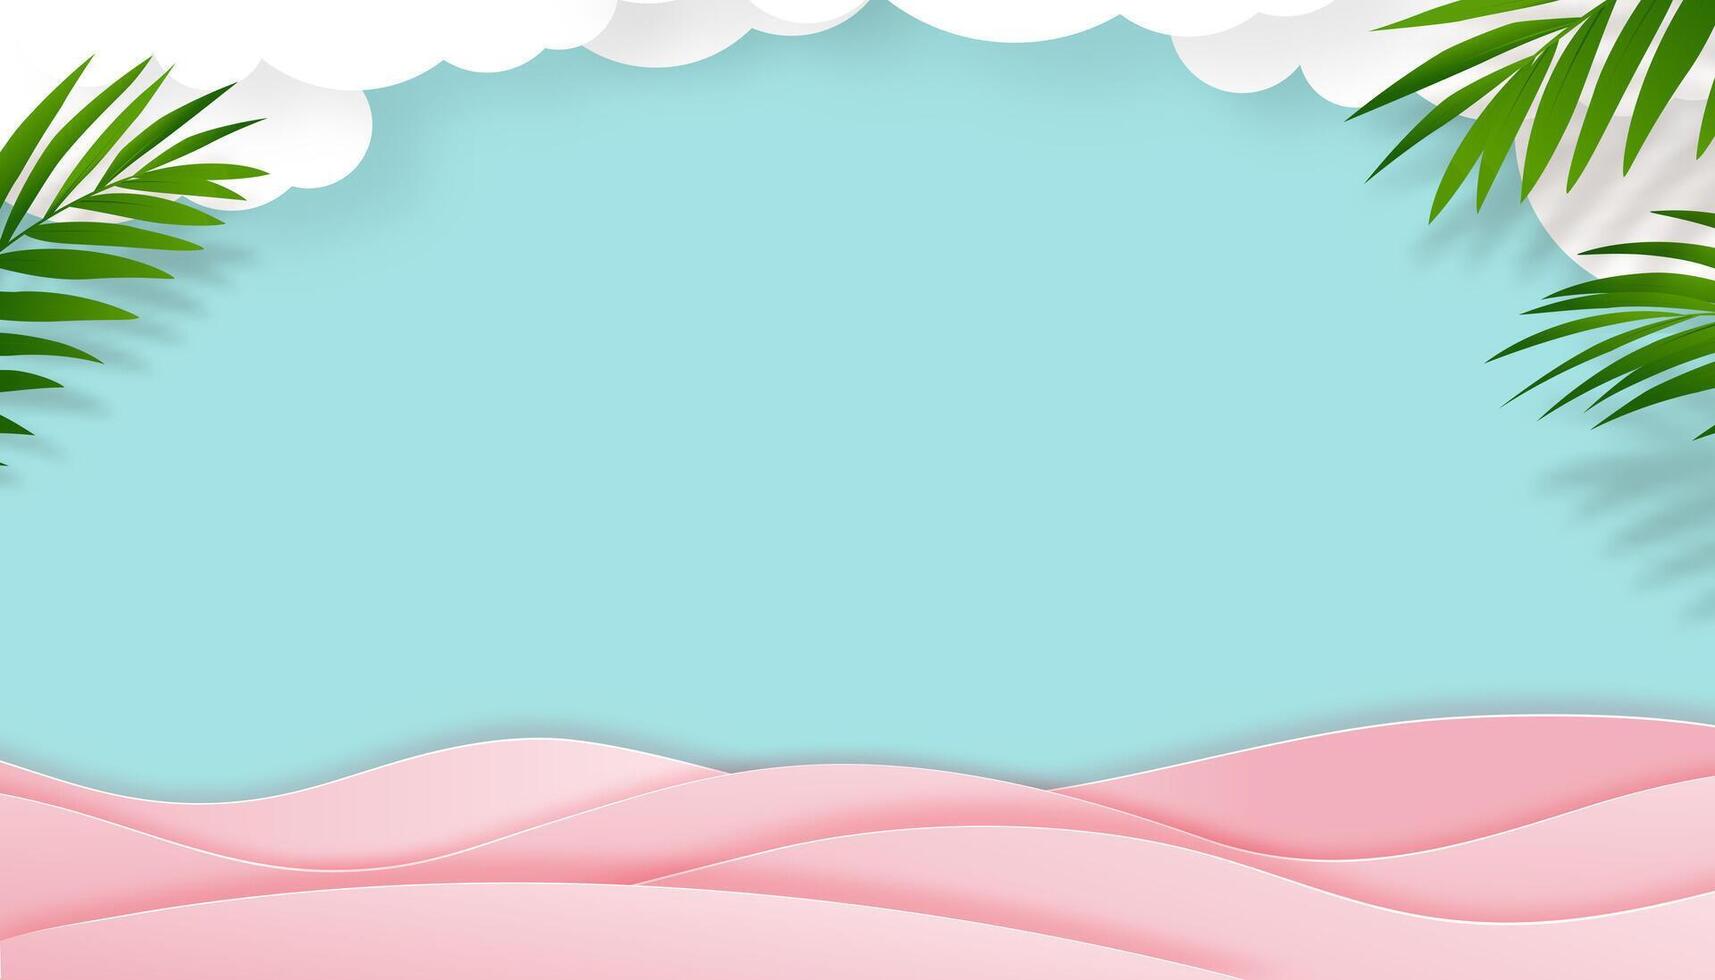 Summer background,Vector paper cut of tropical summer design, palm leaf border frame and white cloud on blue sky background with pink wave layer and copy space,Beach vacation holiday  for Sale Promo vector